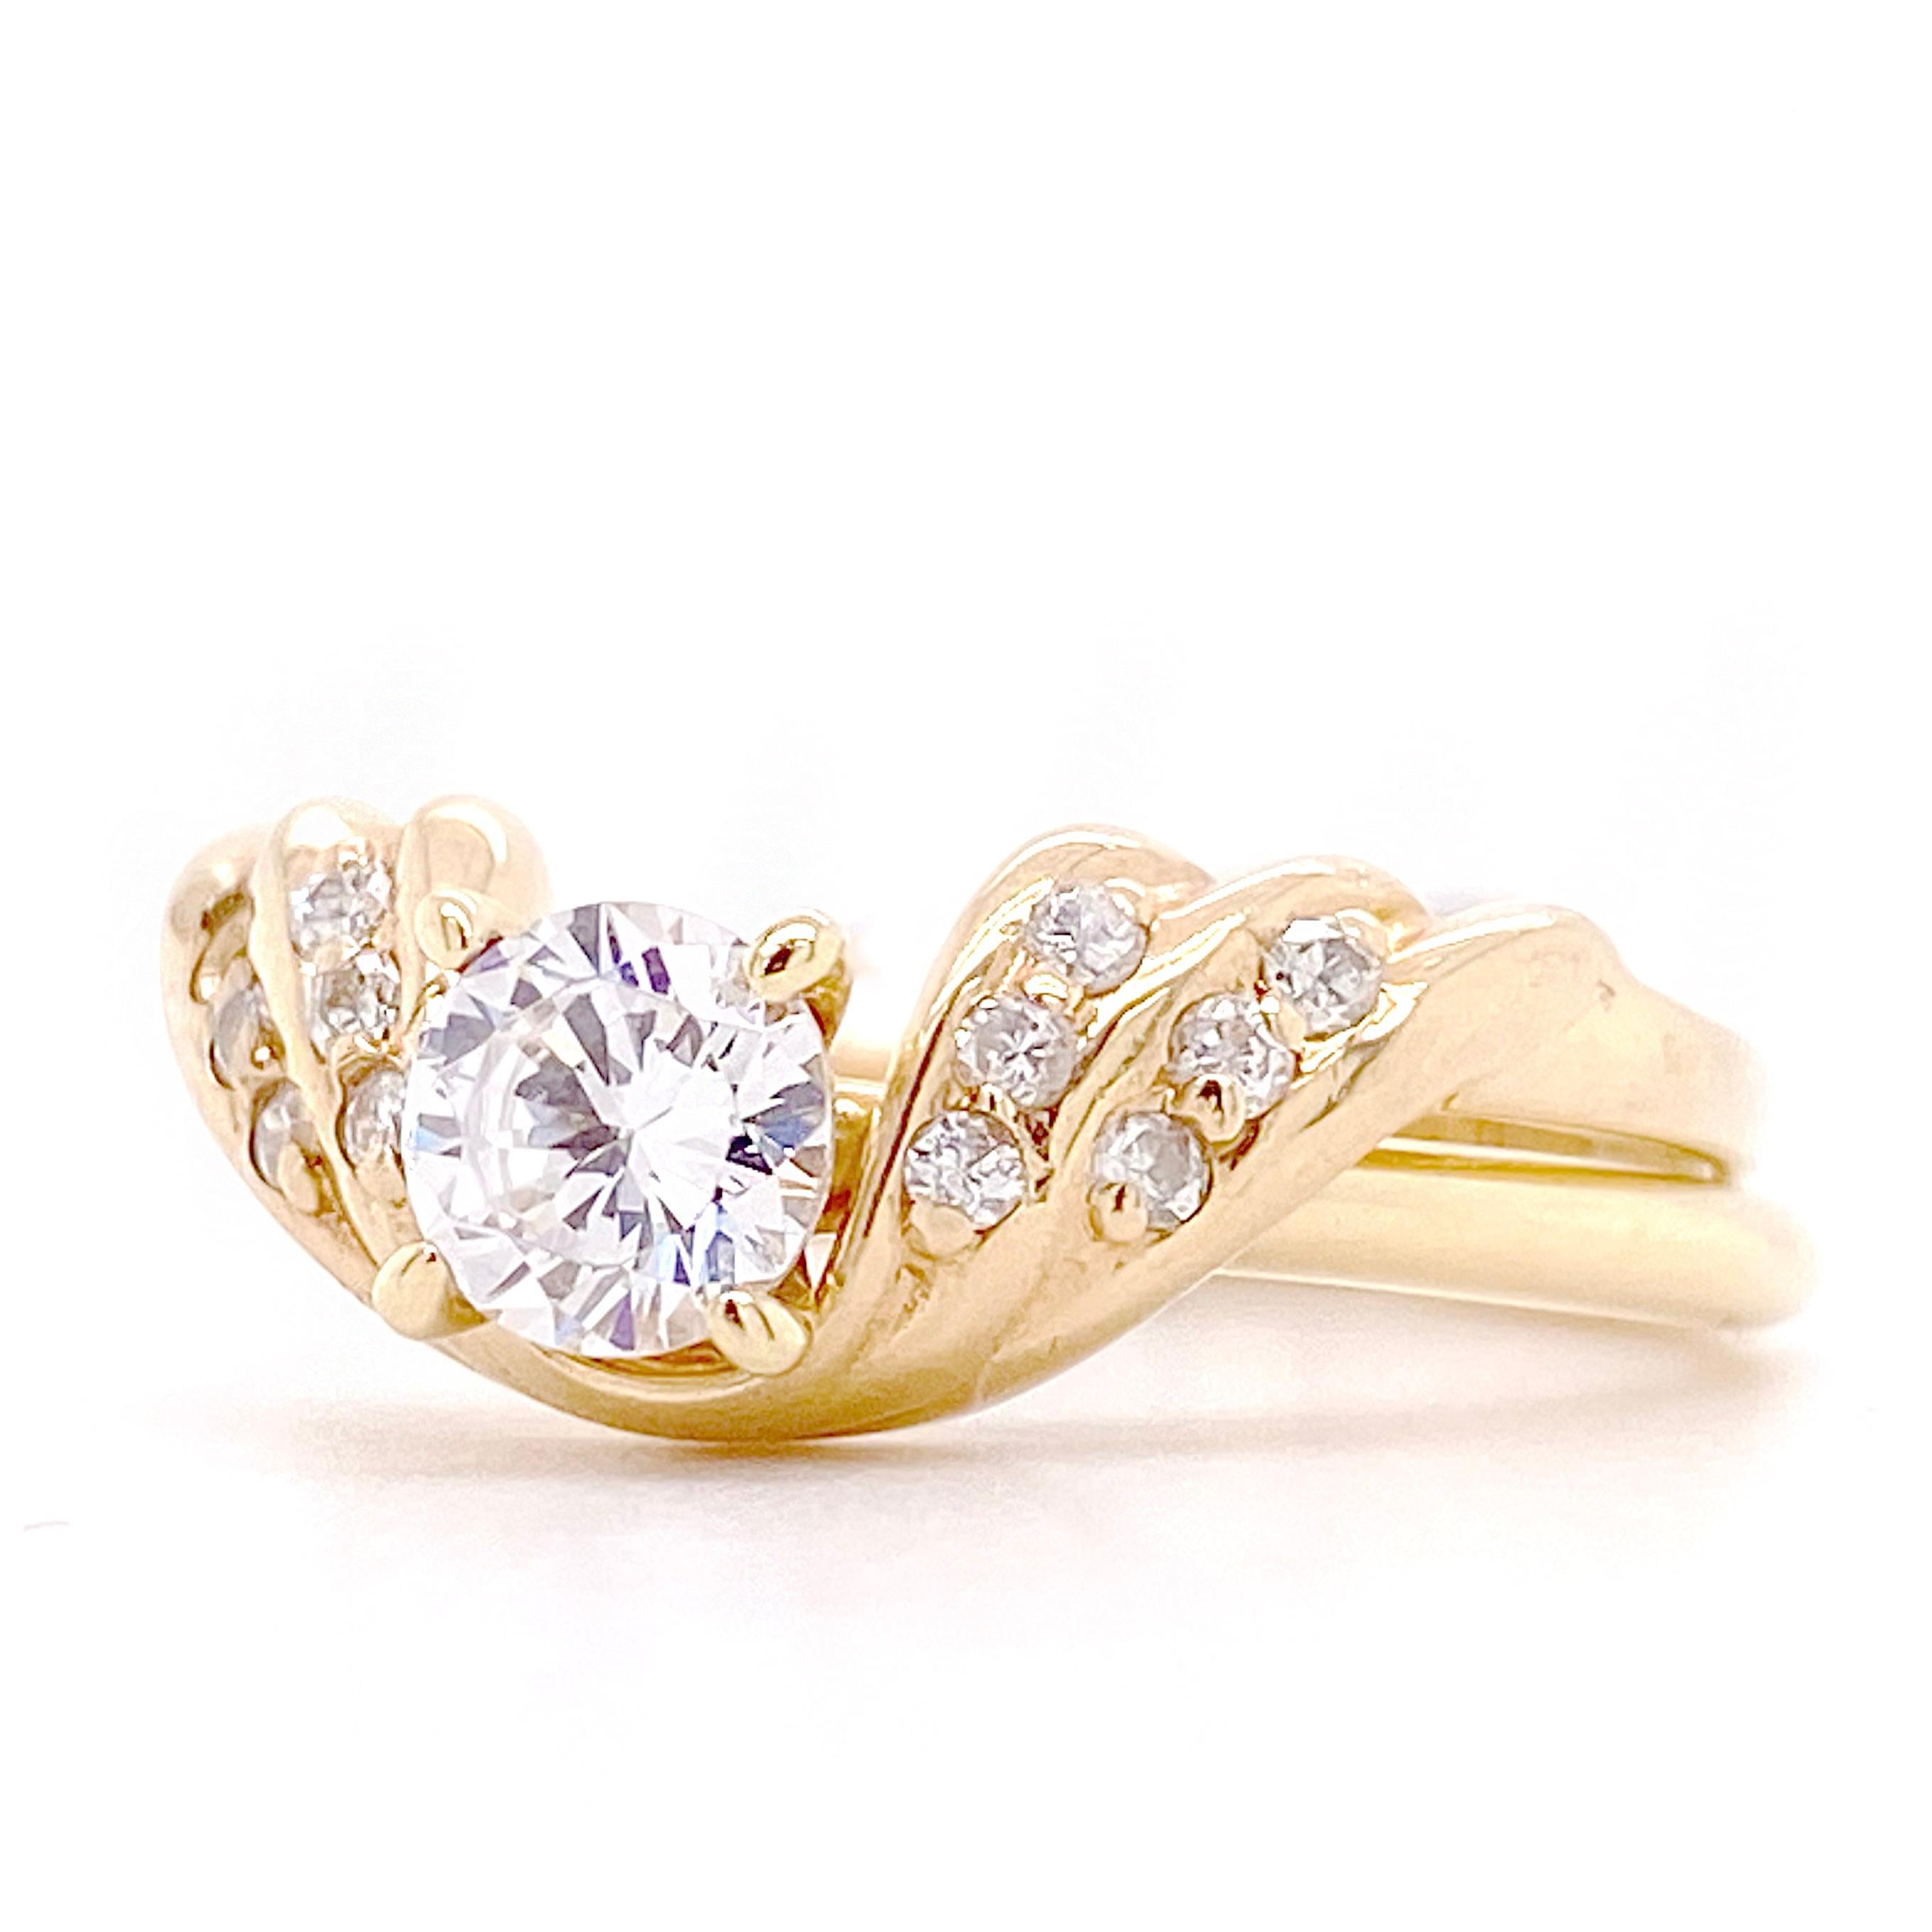 This ring wraps around a plain solitaire perfectly. The solitaire can have four or six prongs and the wrap makes it look totally different. The wrap fits snuggly against the solitaire and locks in place. The ring is solid 14 karat yellow gold and